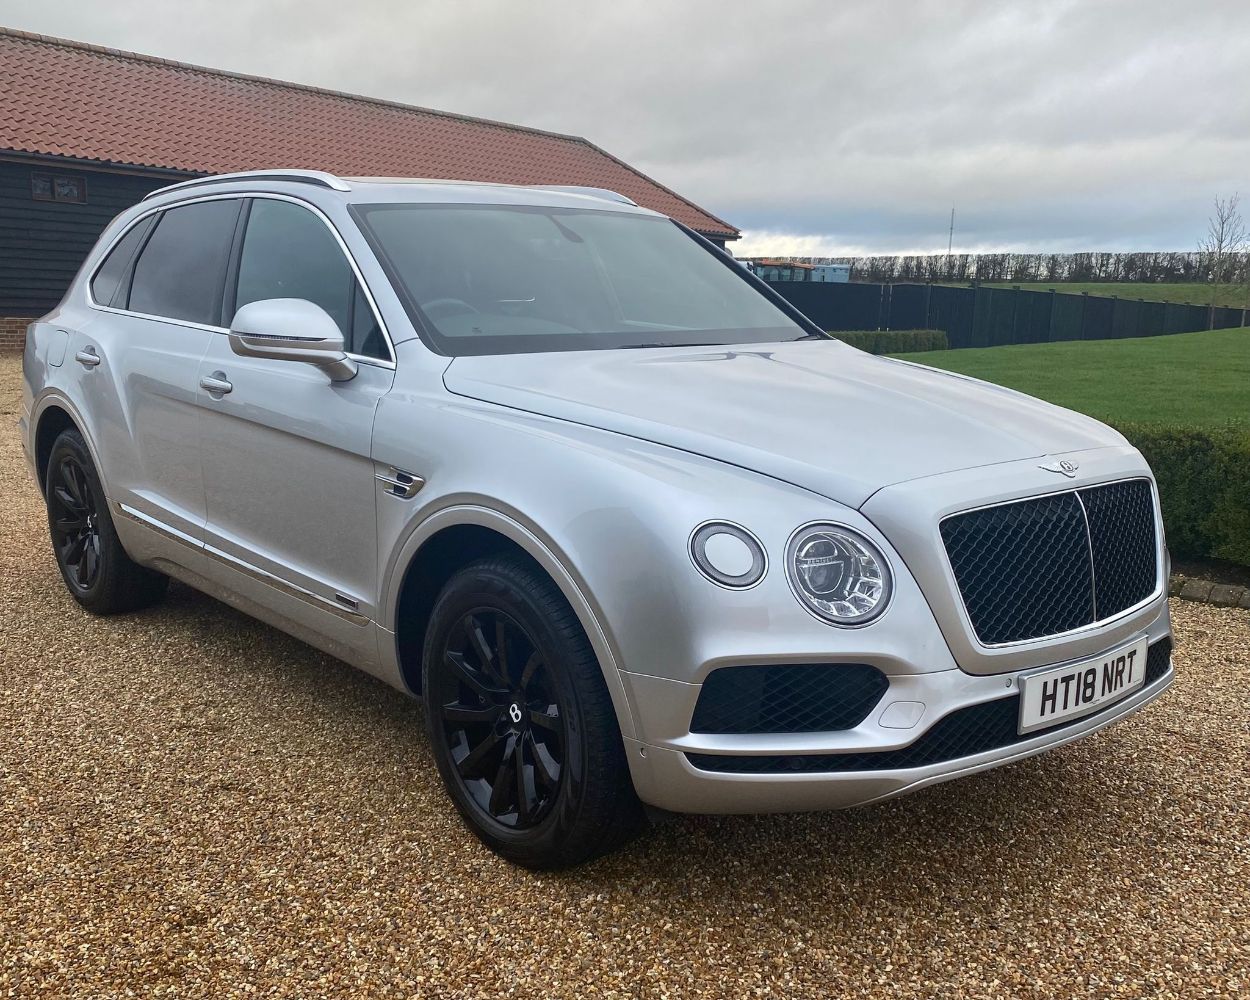 BENTLEY BENTAYGA 4.0d 18 REG - Range Rover SPORT AUTOBIOGRAPHY + SELECTION OF MODERN COMMERCIAL VEHICLES & LATE MODEL CARS AND 4X4s